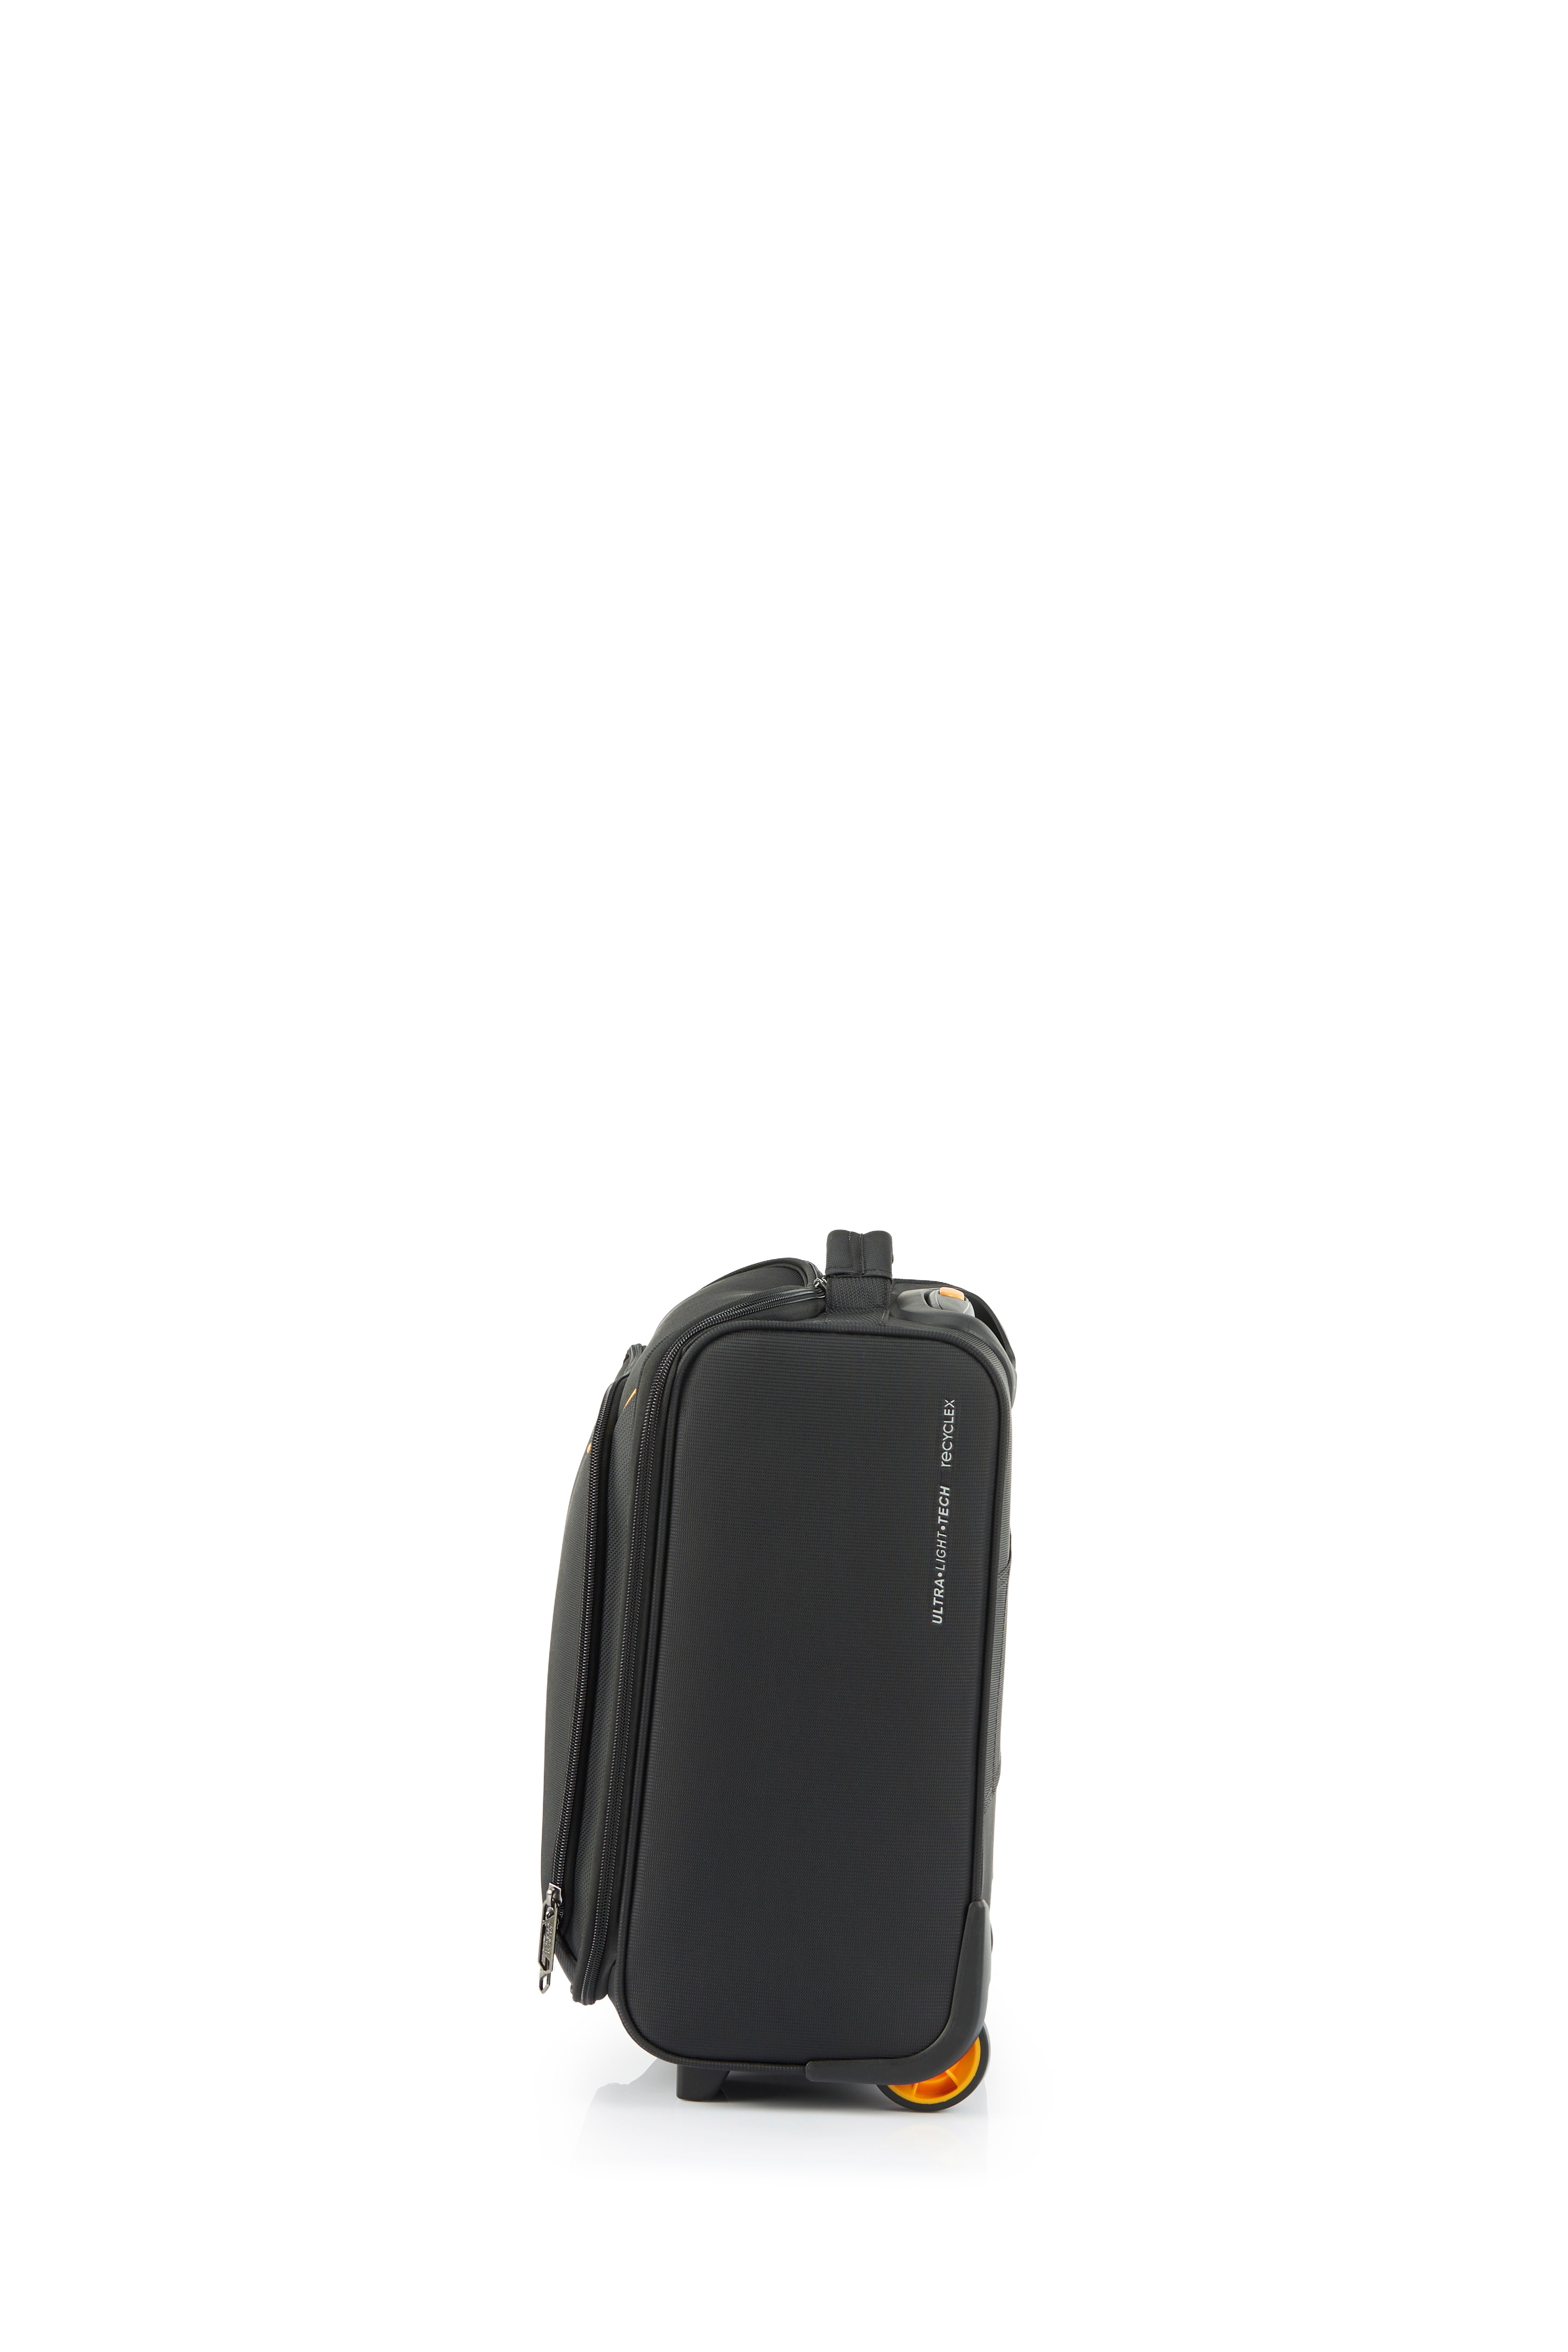 American Tourister - Applite ECO Underseater Suitcase - Black/Must-4